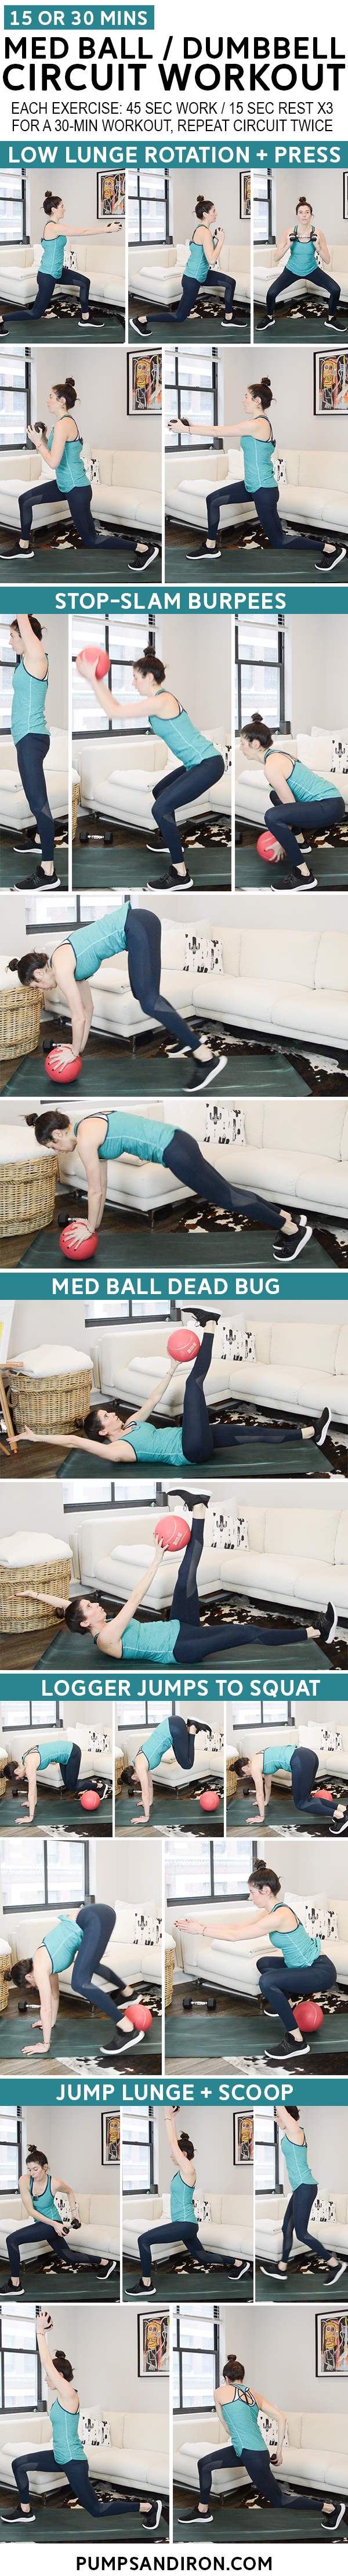 15 Or 30 Minute Full Body Circuit Workout Med Ball Pumps